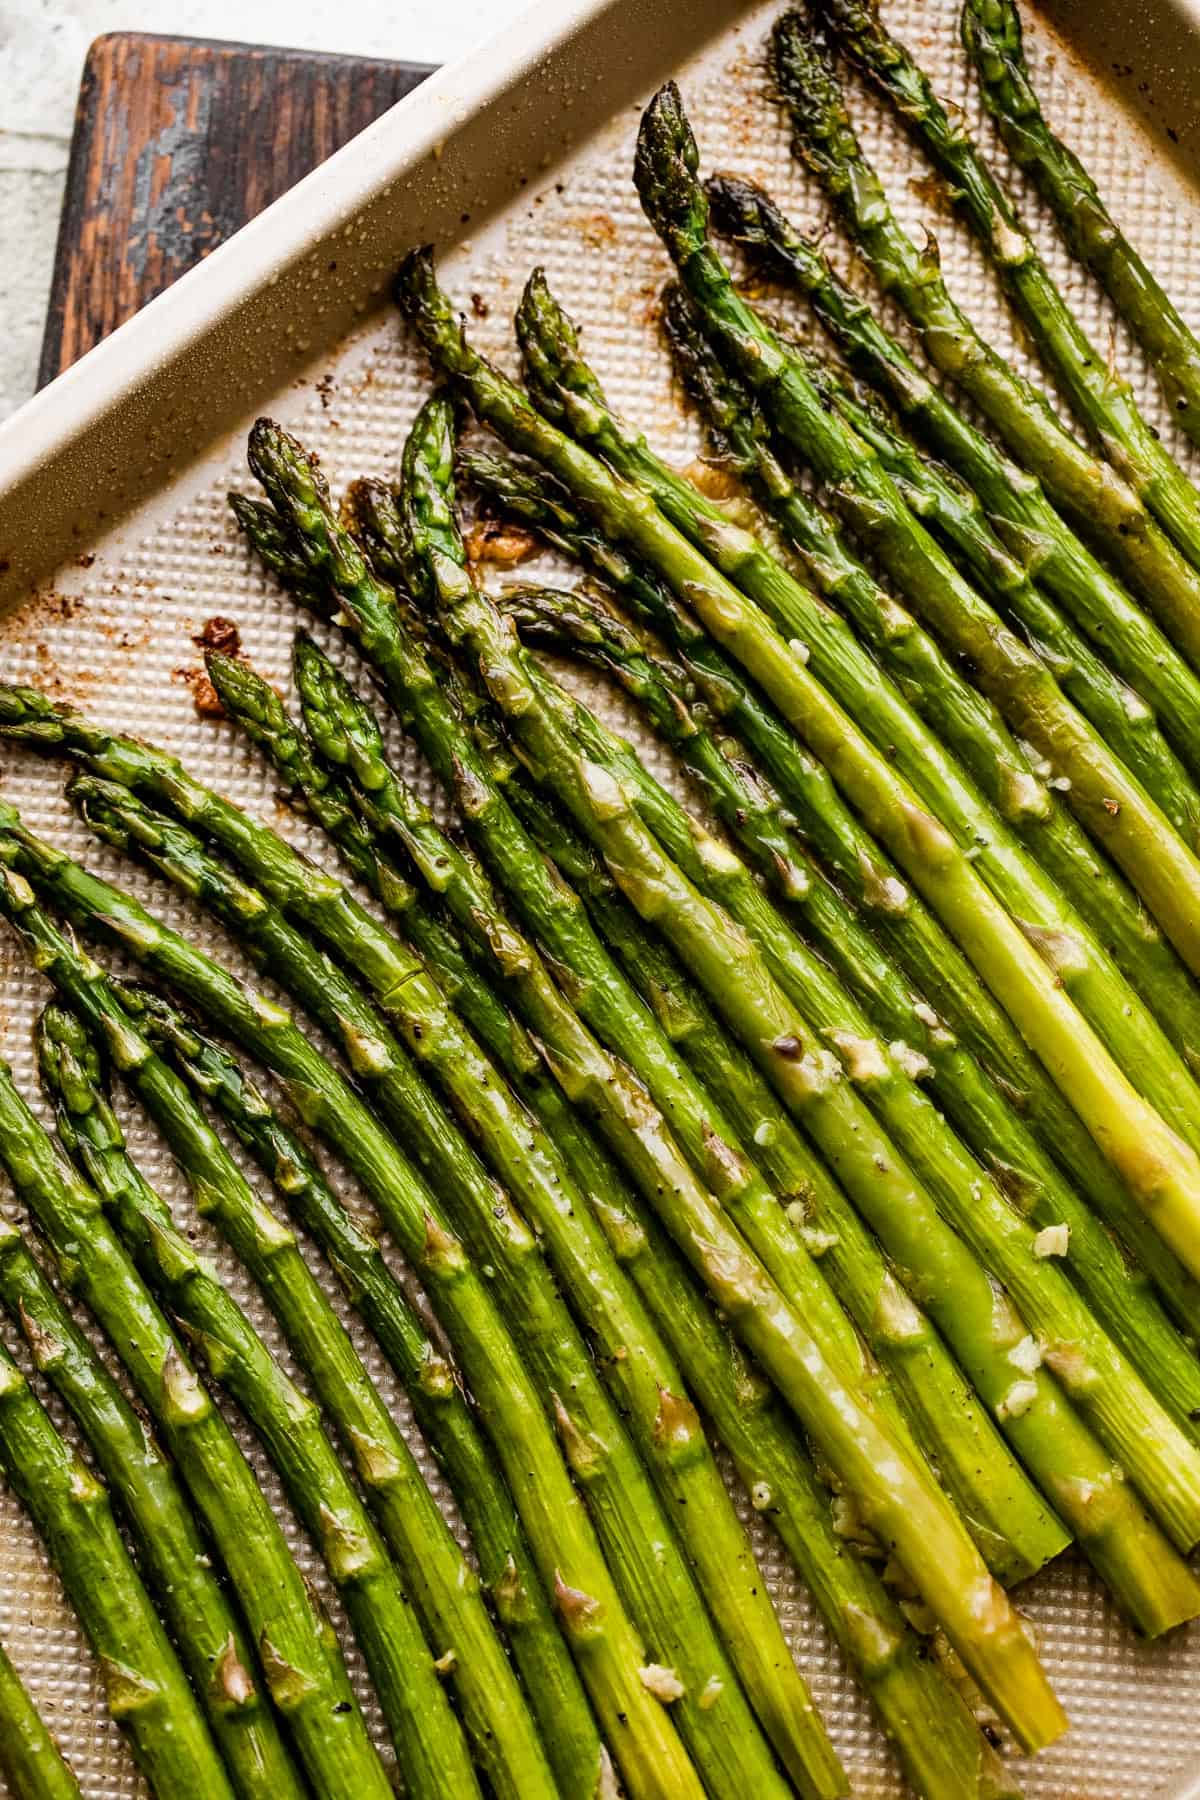 asparagus spears arranged on a gold-colored baking sheet.